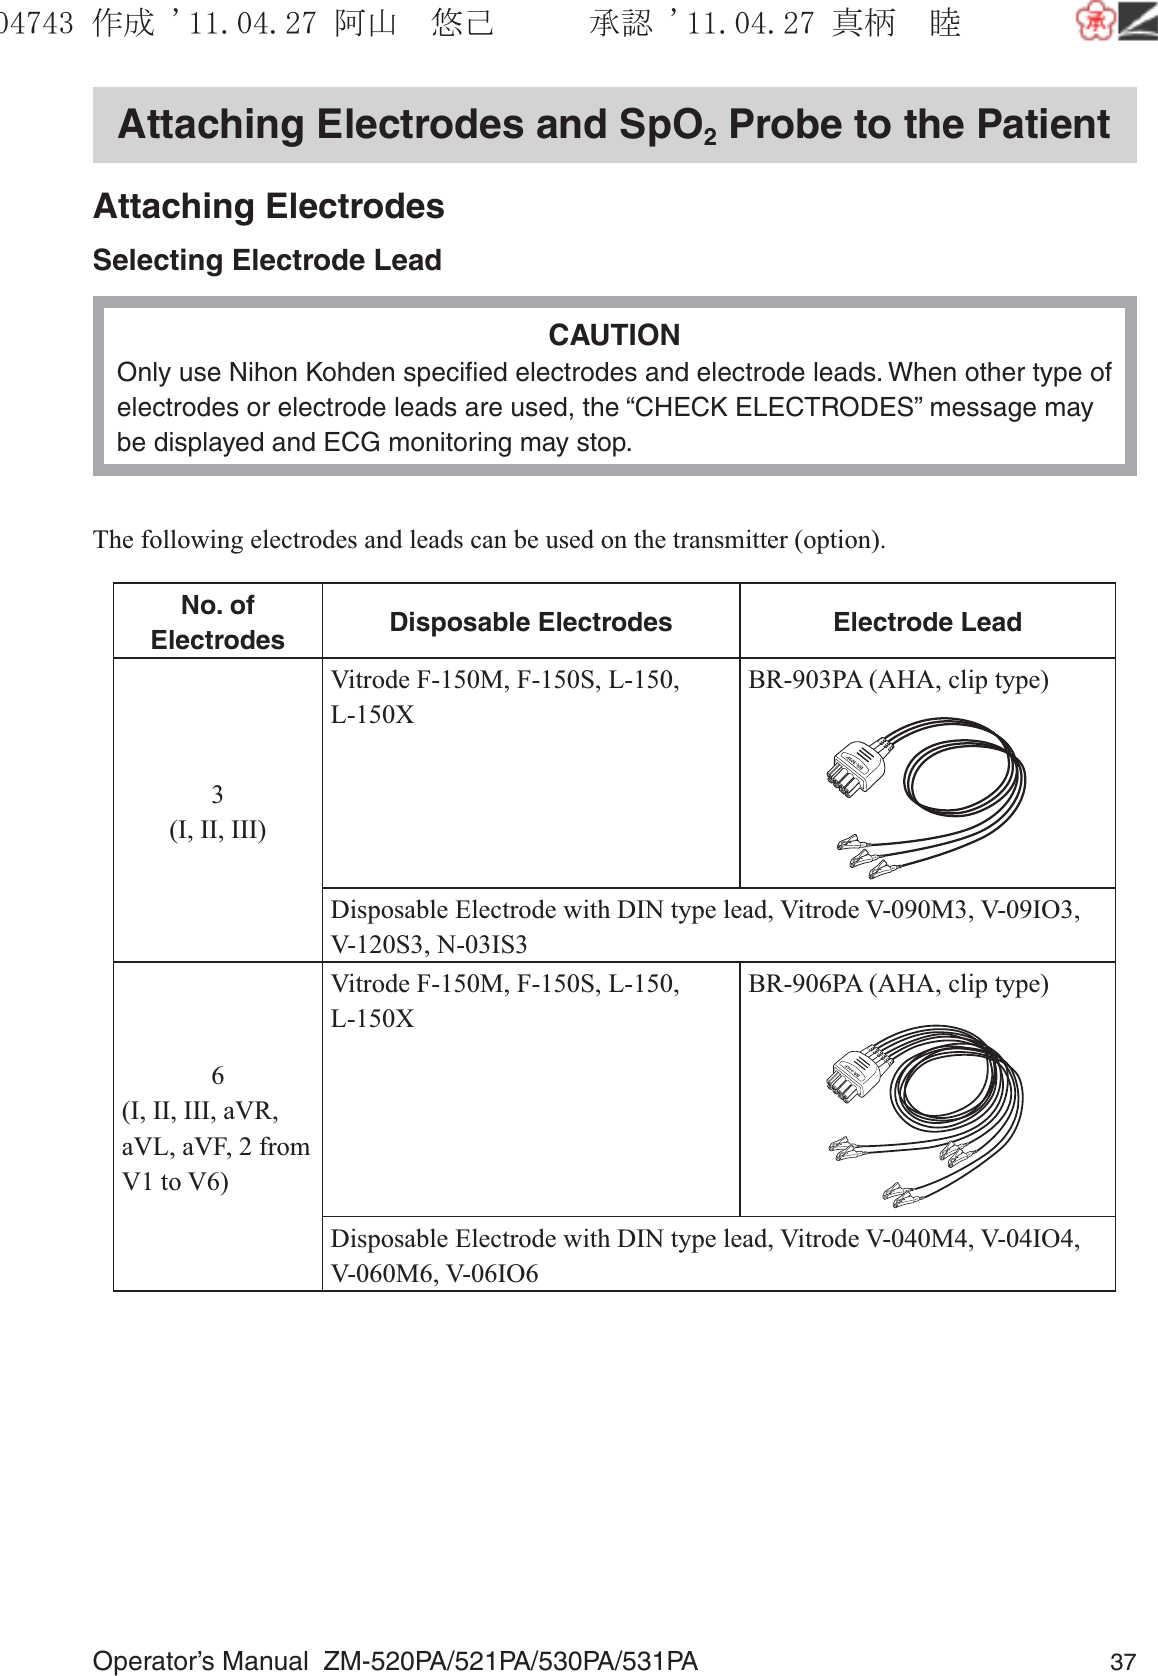 Operator’s Manual  ZM-520PA/521PA/530PA/531PA 37Attaching Electrodes and SpO2 Probe to the PatientAttaching ElectrodesSelecting Electrode LeadCAUTIONOnly use Nihon Kohden speciﬁed electrodes and electrode leads. When other type of electrodes or electrode leads are used, the “CHECK ELECTRODES” message may be displayed and ECG monitoring may stop.The following electrodes and leads can be used on the transmitter (option).No. of Electrodes Disposable Electrodes Electrode Lead3(I, II, III)Vitrode F-150M, F-150S, L-150, L-150XBR-903PA (AHA, clip type)Disposable Electrode with DIN type lead, Vitrode V-090M3, V-09IO3, V-120S3, N-03IS36(I, II, III, aVR, aVL, aVF, 2 from V1 to V6)Vitrode F-150M, F-150S, L-150, L-150XBR-906PA (AHA, clip type)Disposable Electrode with DIN type lead, Vitrode V-040M4, V-04IO4, V-060M6, V-06IO6૞ᚑ㒙ጊޓᖘᏆ ᛚ⹺⌀ᨩޓ⌬